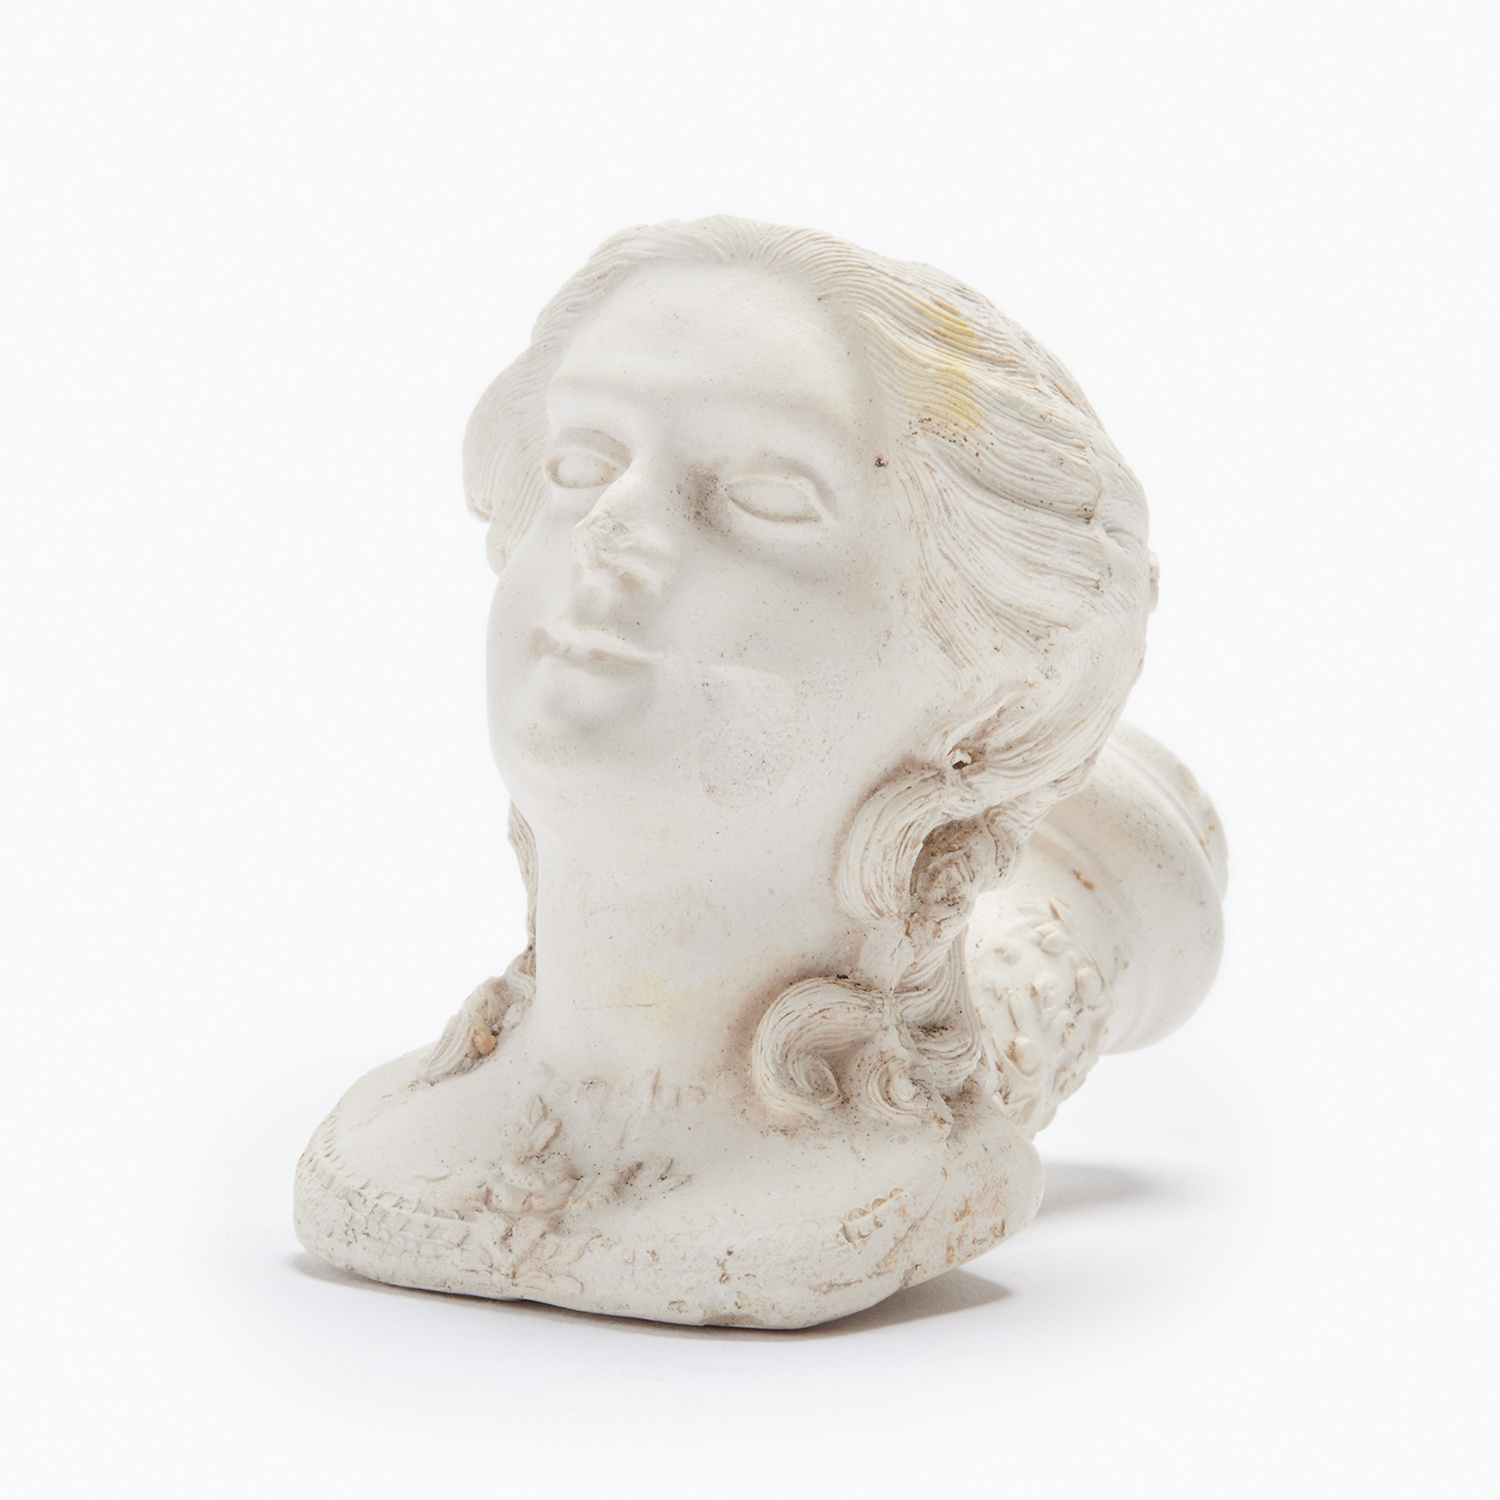 A miniature white bust sculpted of clay, this woman is merely a head with a tumble of finely-carved hair pulled back into the shape of a smoking pipe with a hole at the top. 